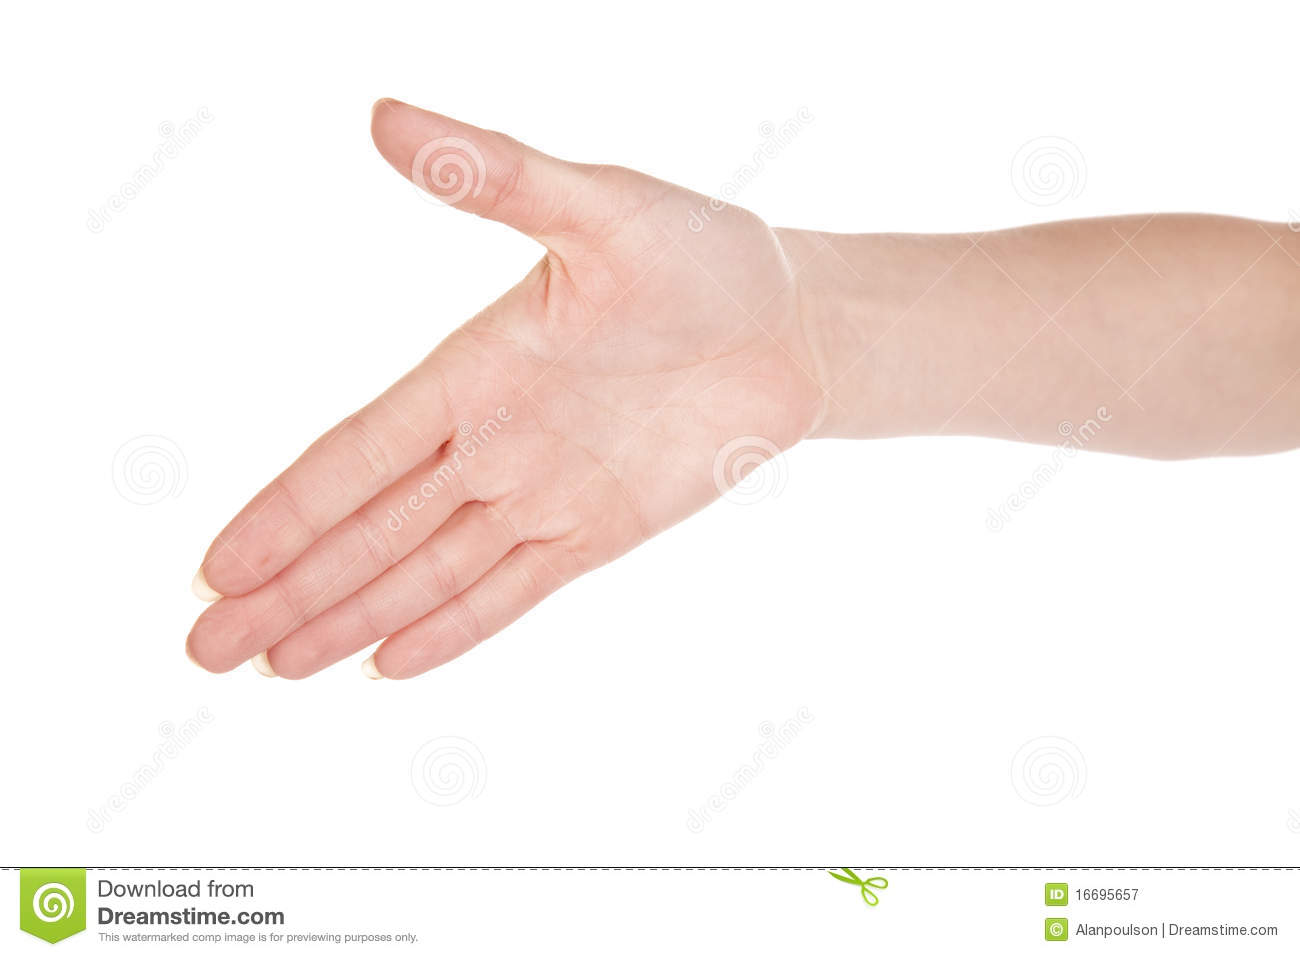 Hand Is Reaching Out So It Can Shake Hands 